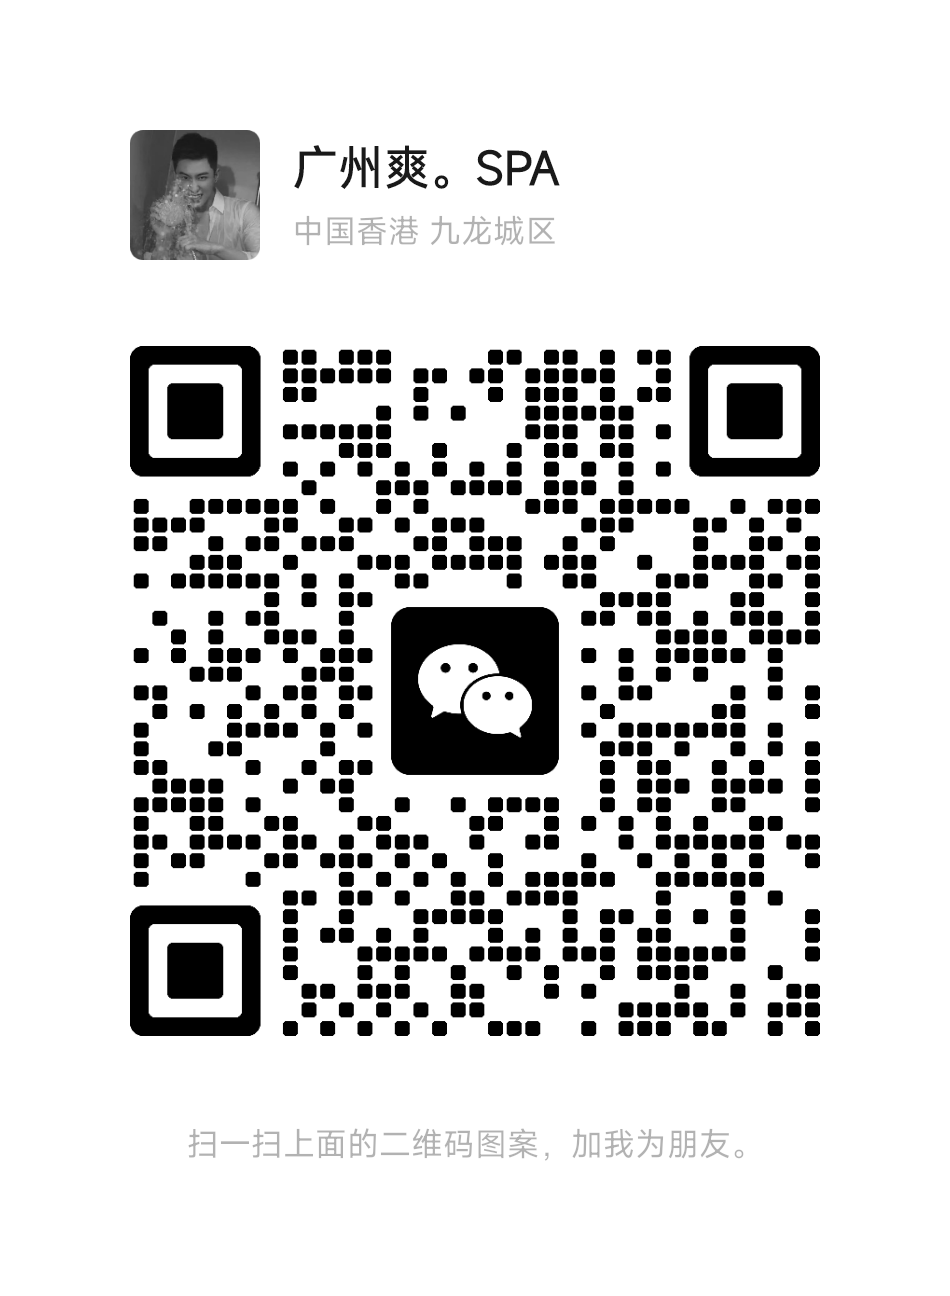 mmqrcode1676878312406.png